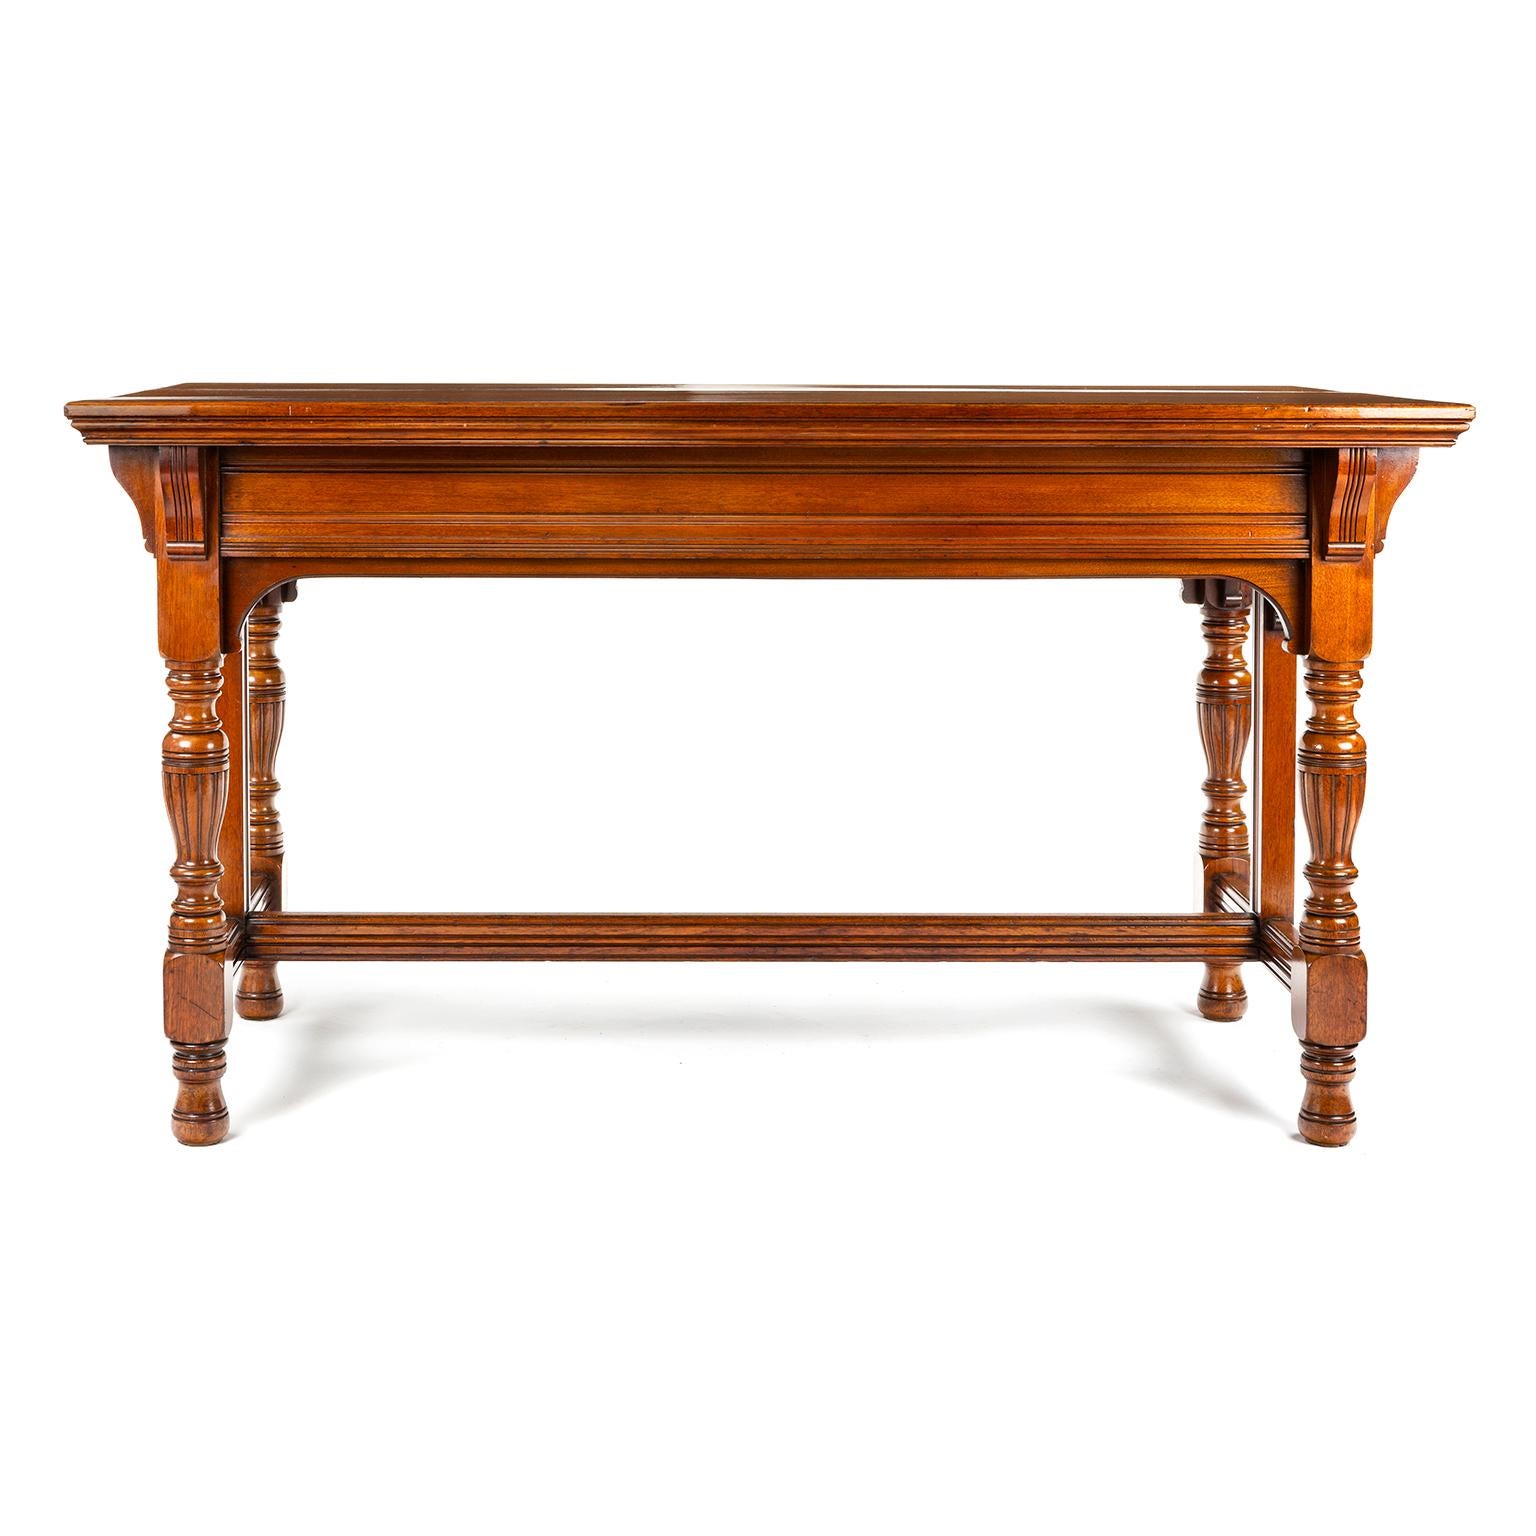 Gillows late 19th C library table in American black walnut, styled after Pugin. The carving is very crisp.

Gillows of Lancaster and London, also known as Gillow & Co., was an English furniture making firm based in Lancaster, Lancashire, and in